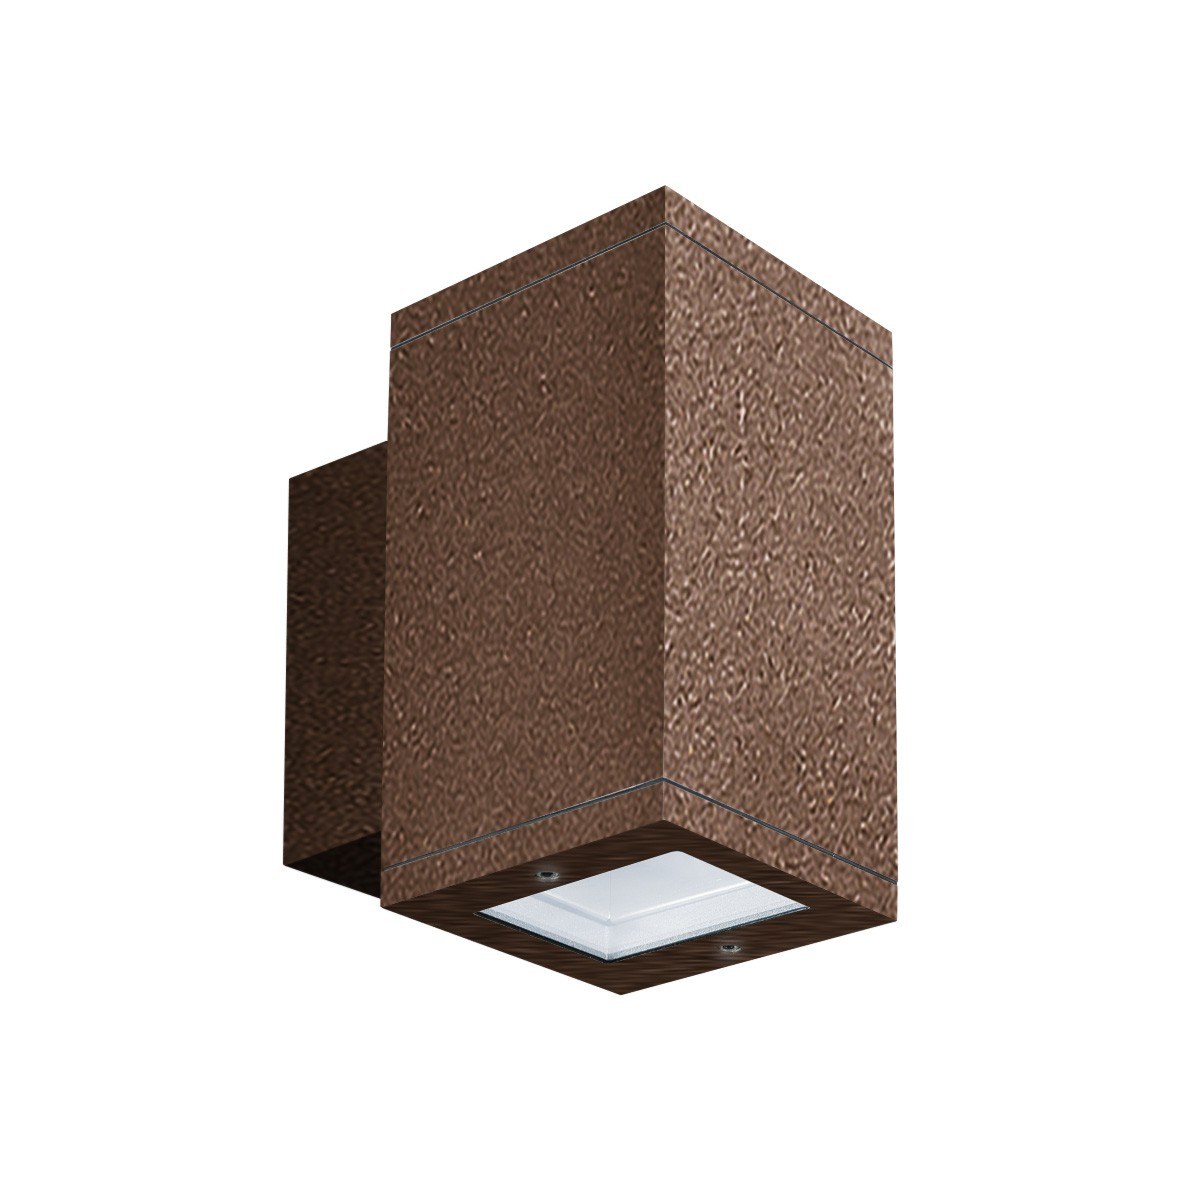 AVERY – LED WALL LAMPLED SQUARED 15,6W 4K MA